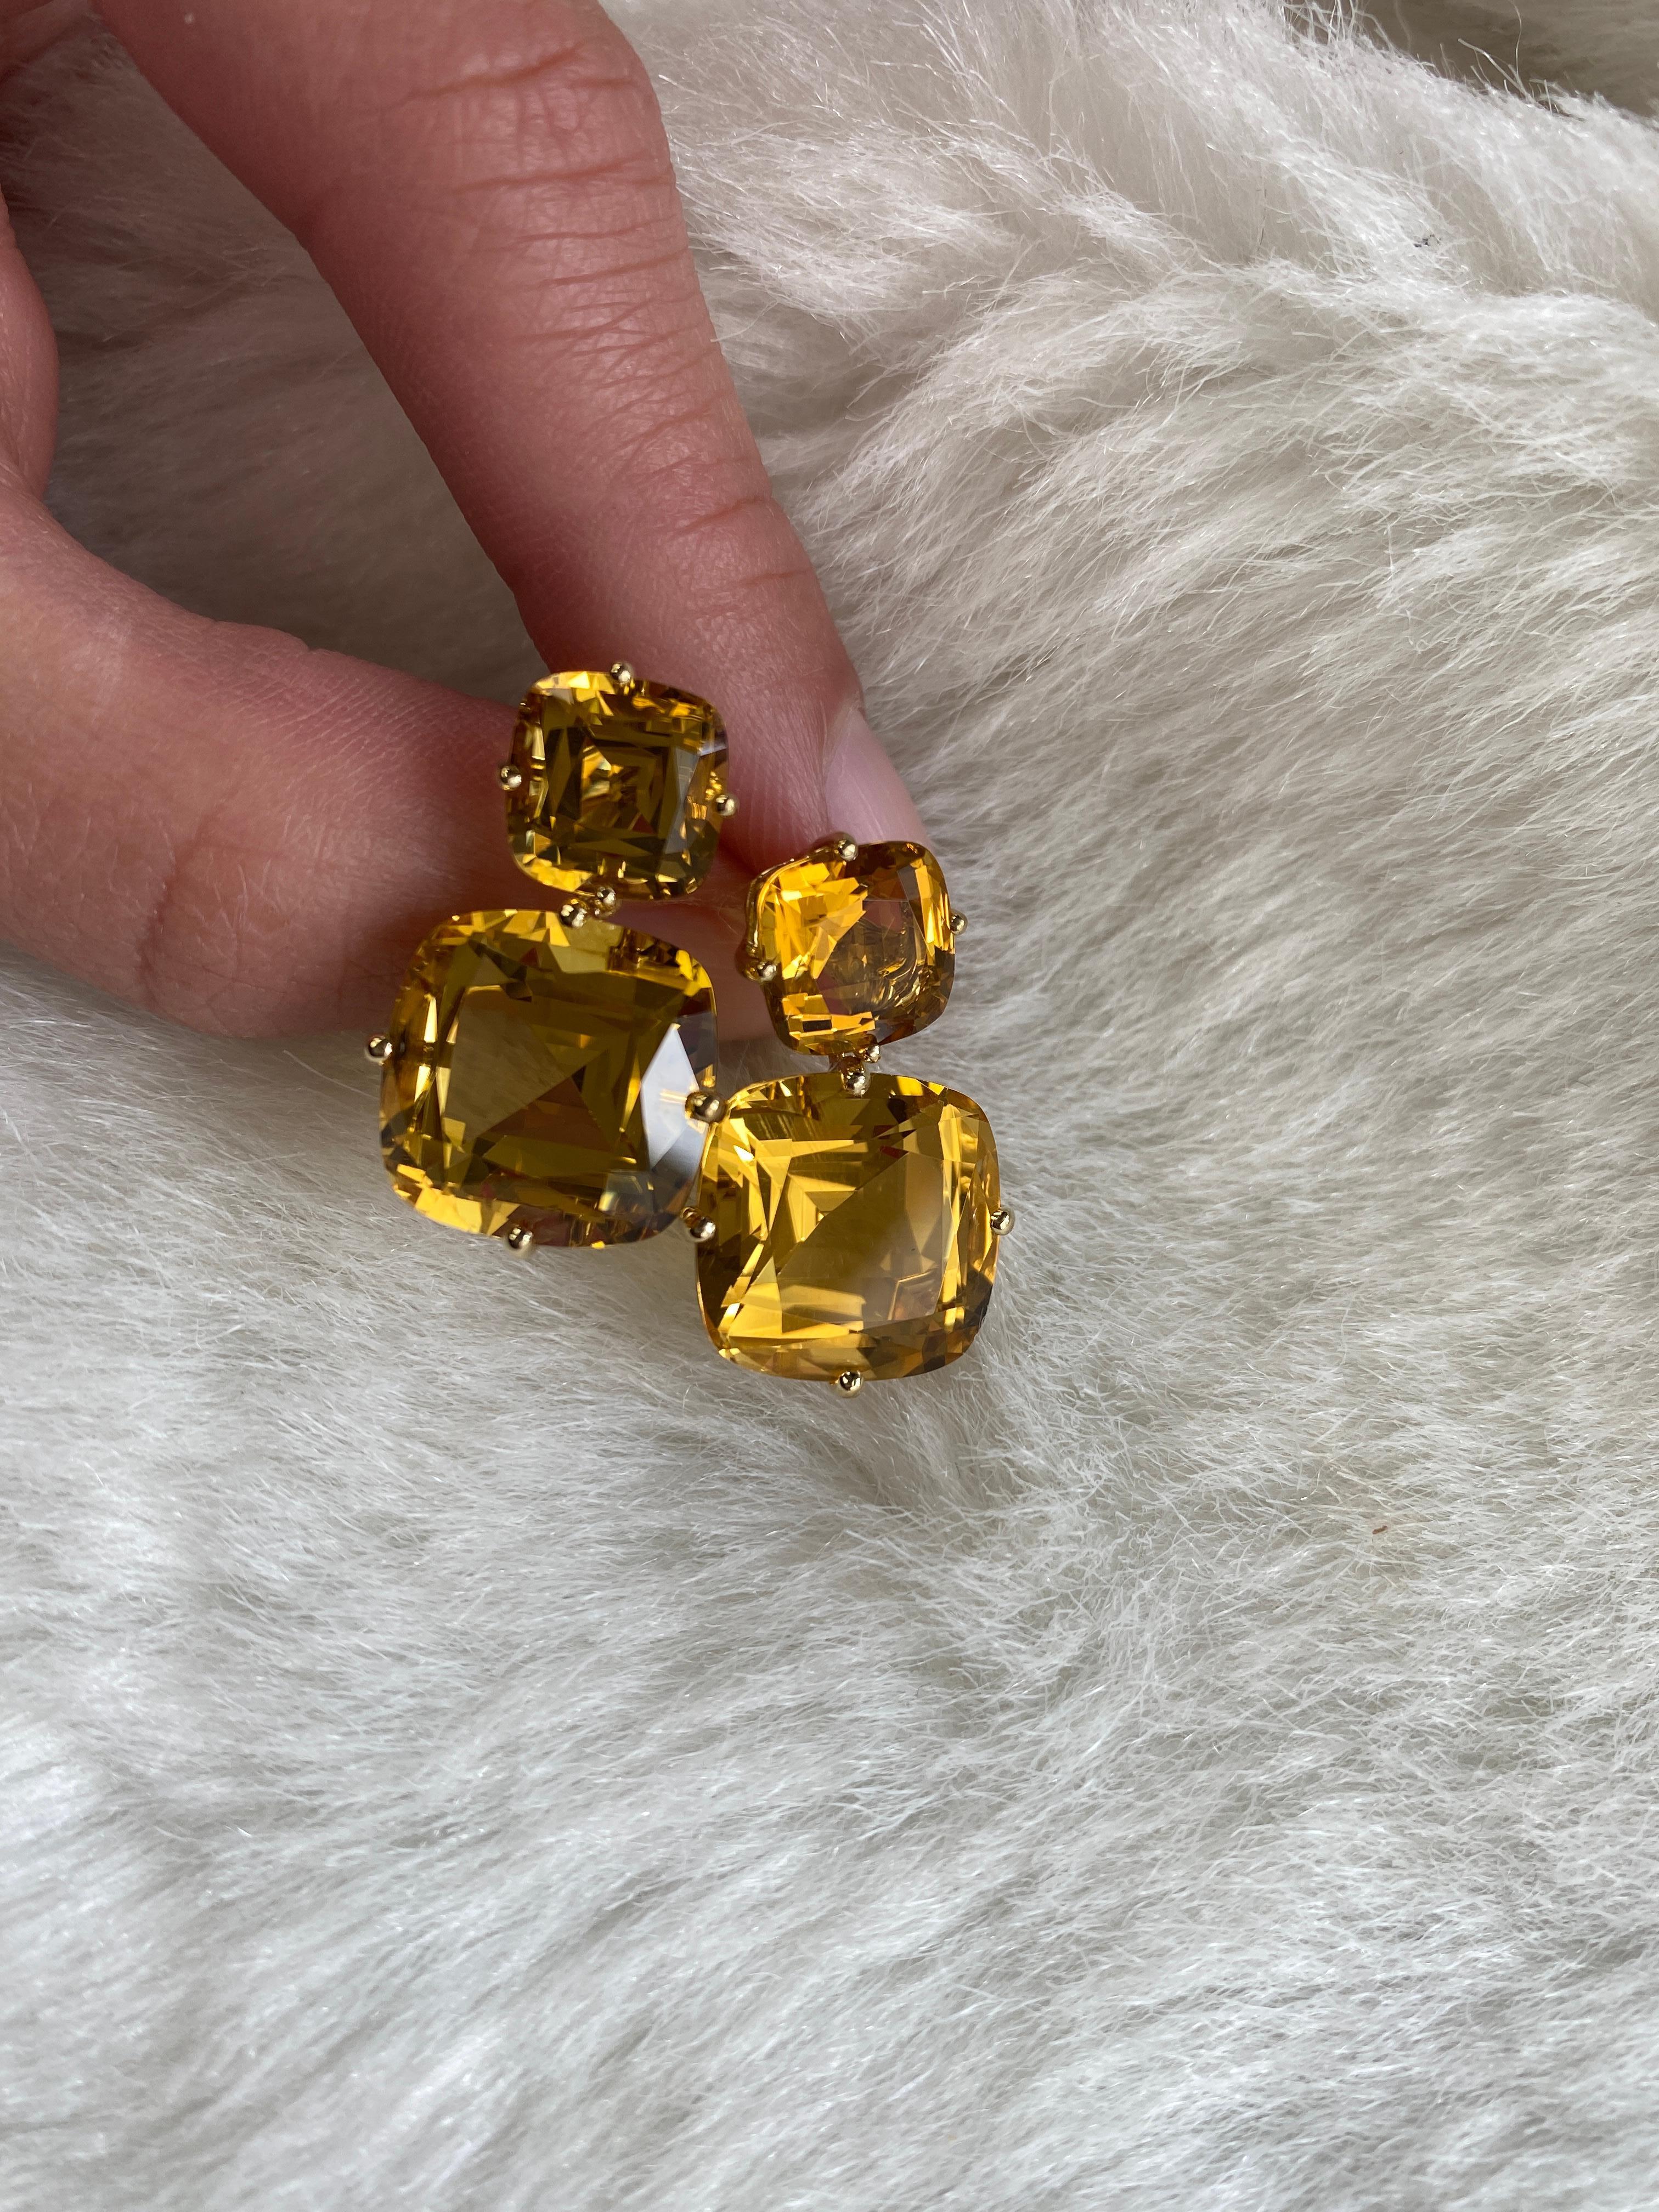 2 Tier Citrine Cushion Earrings in 18k Yellow Gold, from 'Gossip' Collection. Like any good piece of Gossip, this collection carries a hint of shock value. They will have everyone in suspense about what Goshwara will do next.

* Gemstone size: 9 x 9